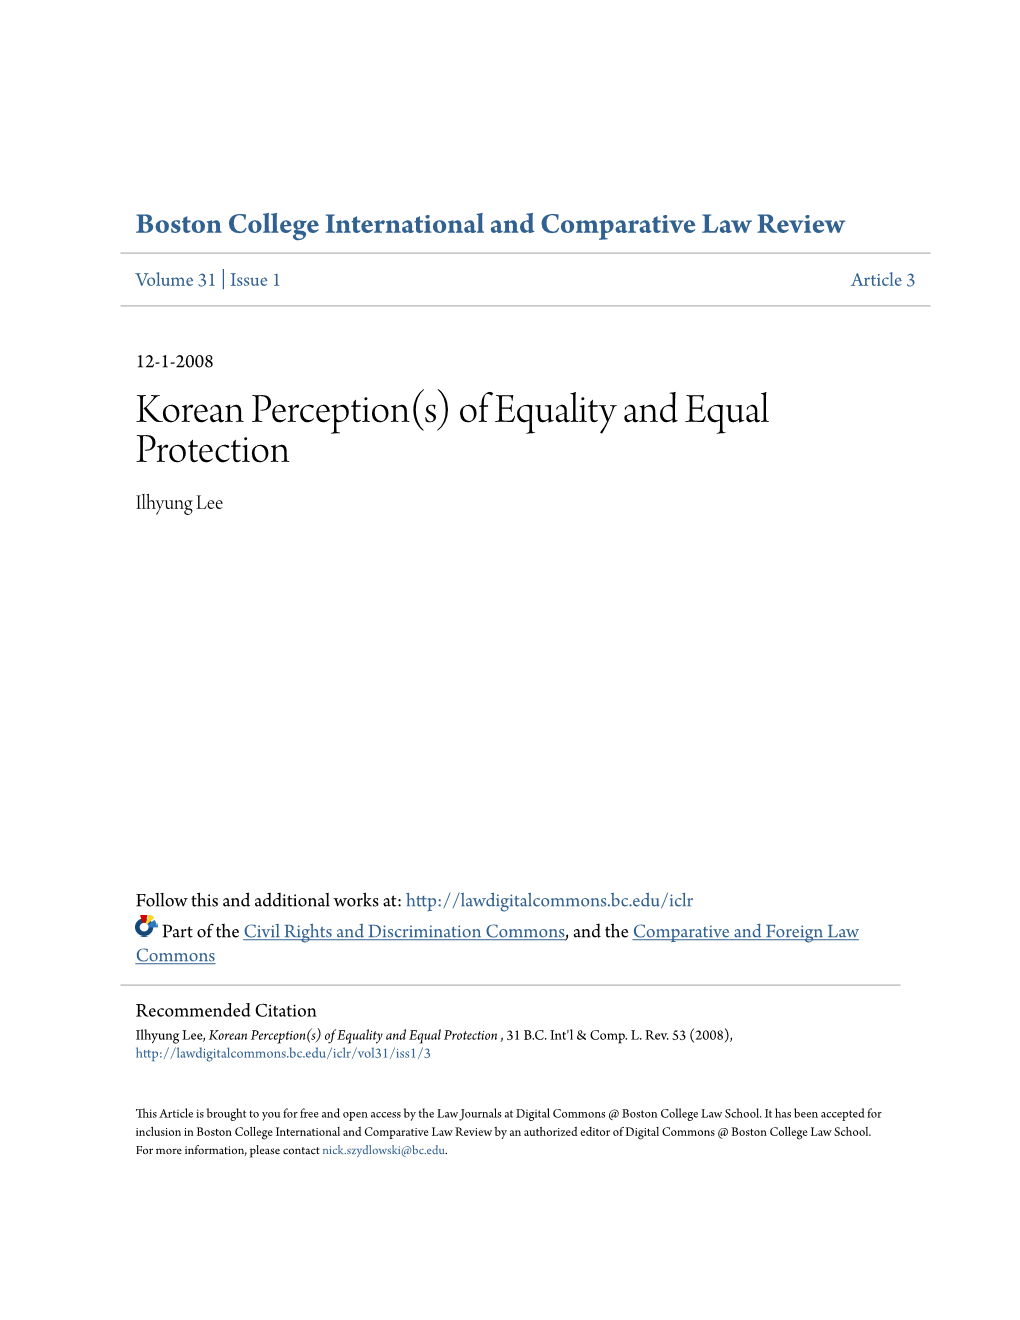 Korean Perception(S) of Equality and Equal Protection Ilhyung Lee